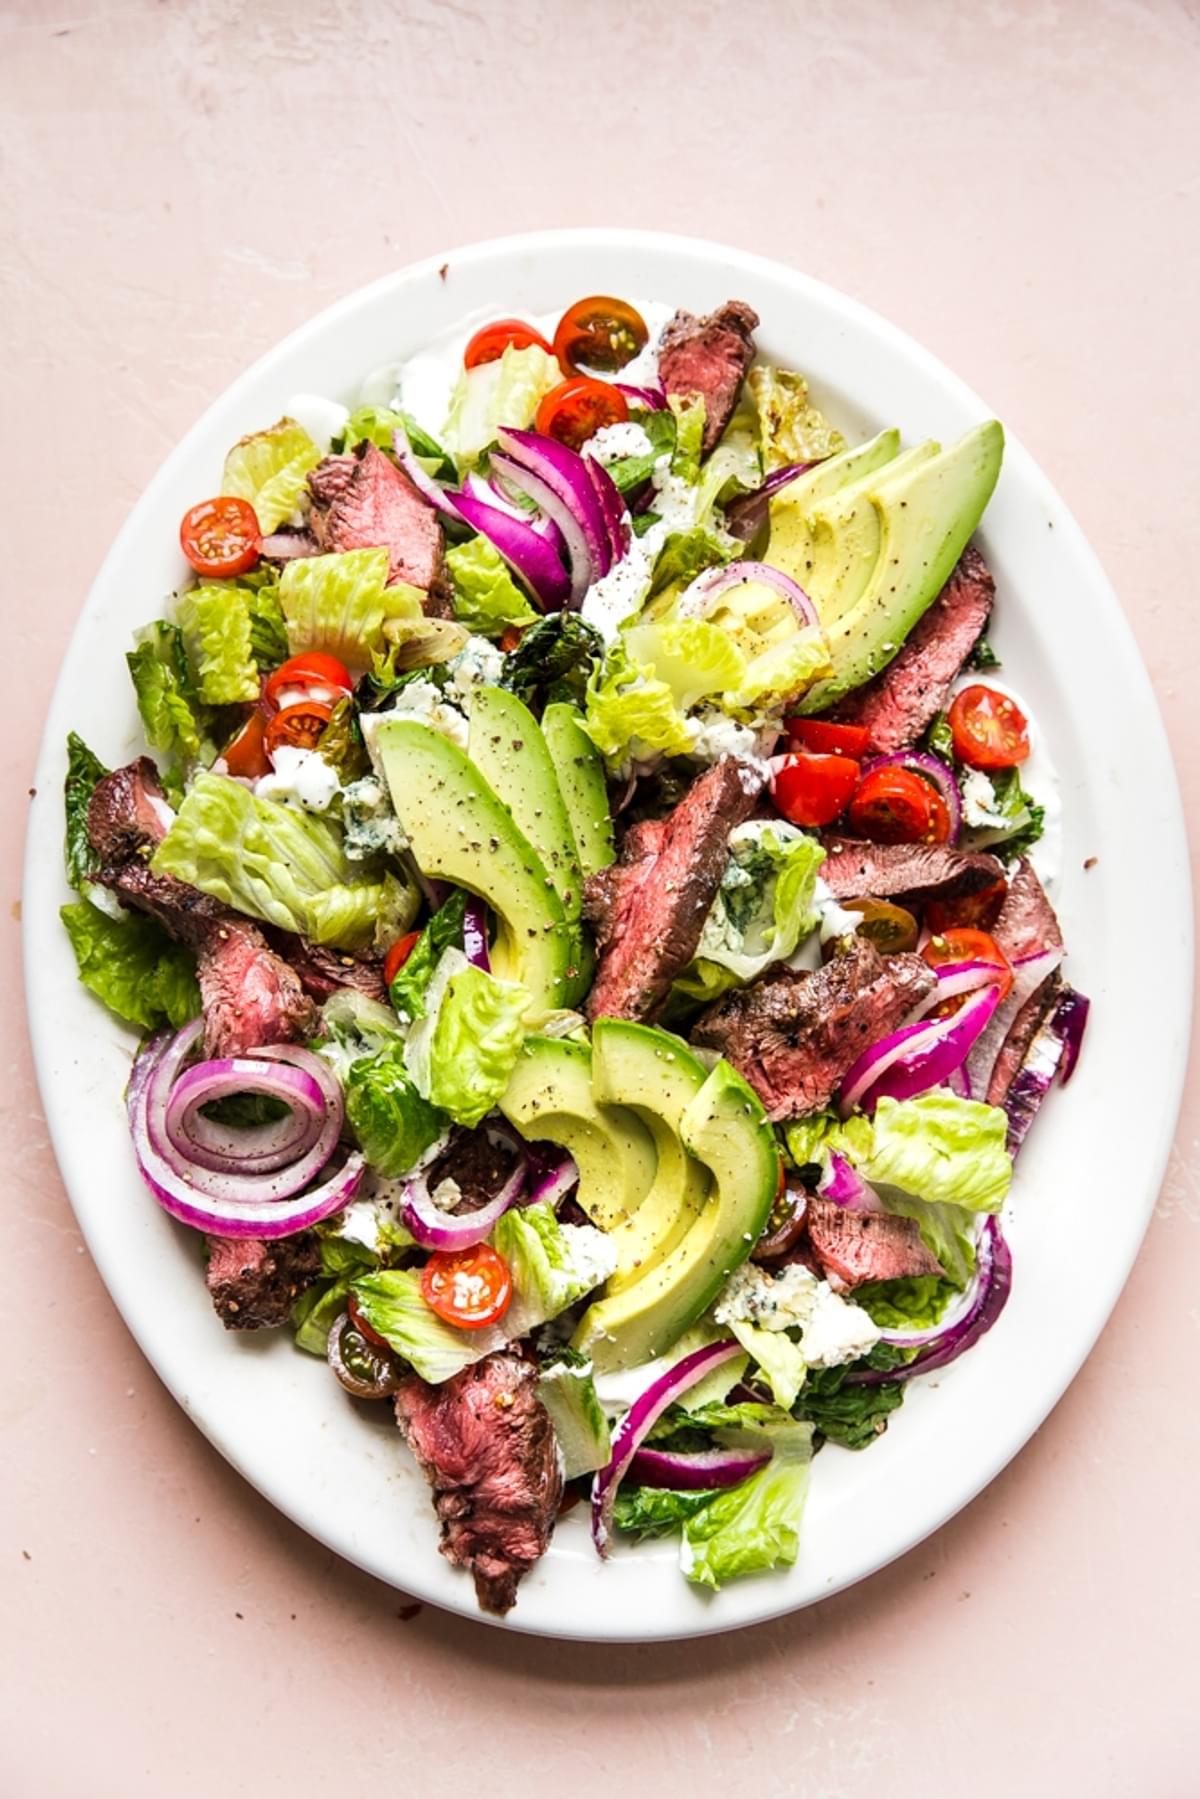 grilled steak salad with avocados, onions, tomatoes and a homemade blue cheese dressing on a large plate